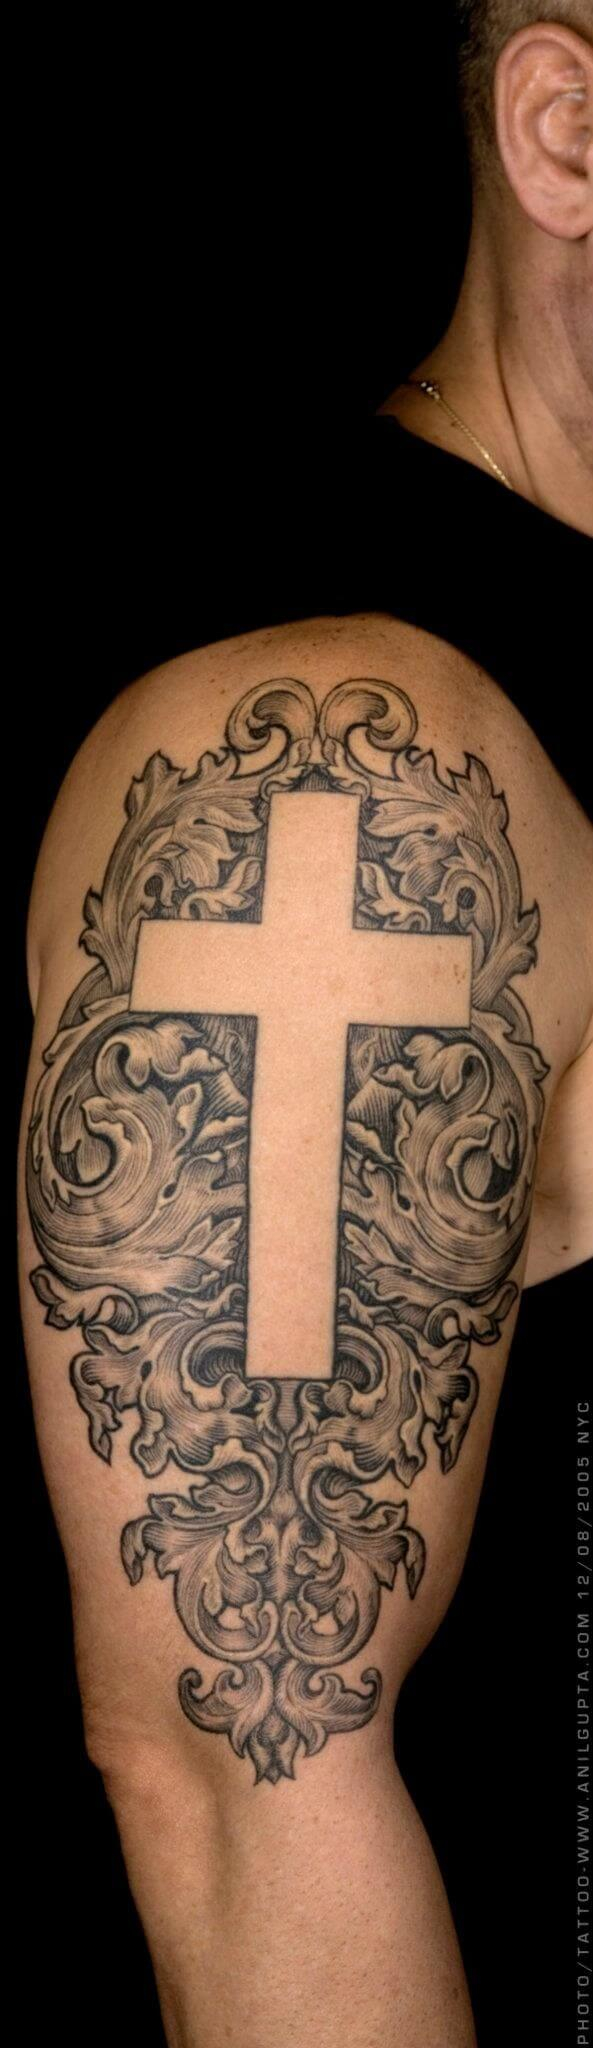 56 Best Cross Tattoos For Men Improb intended for sizing 593 X 2048